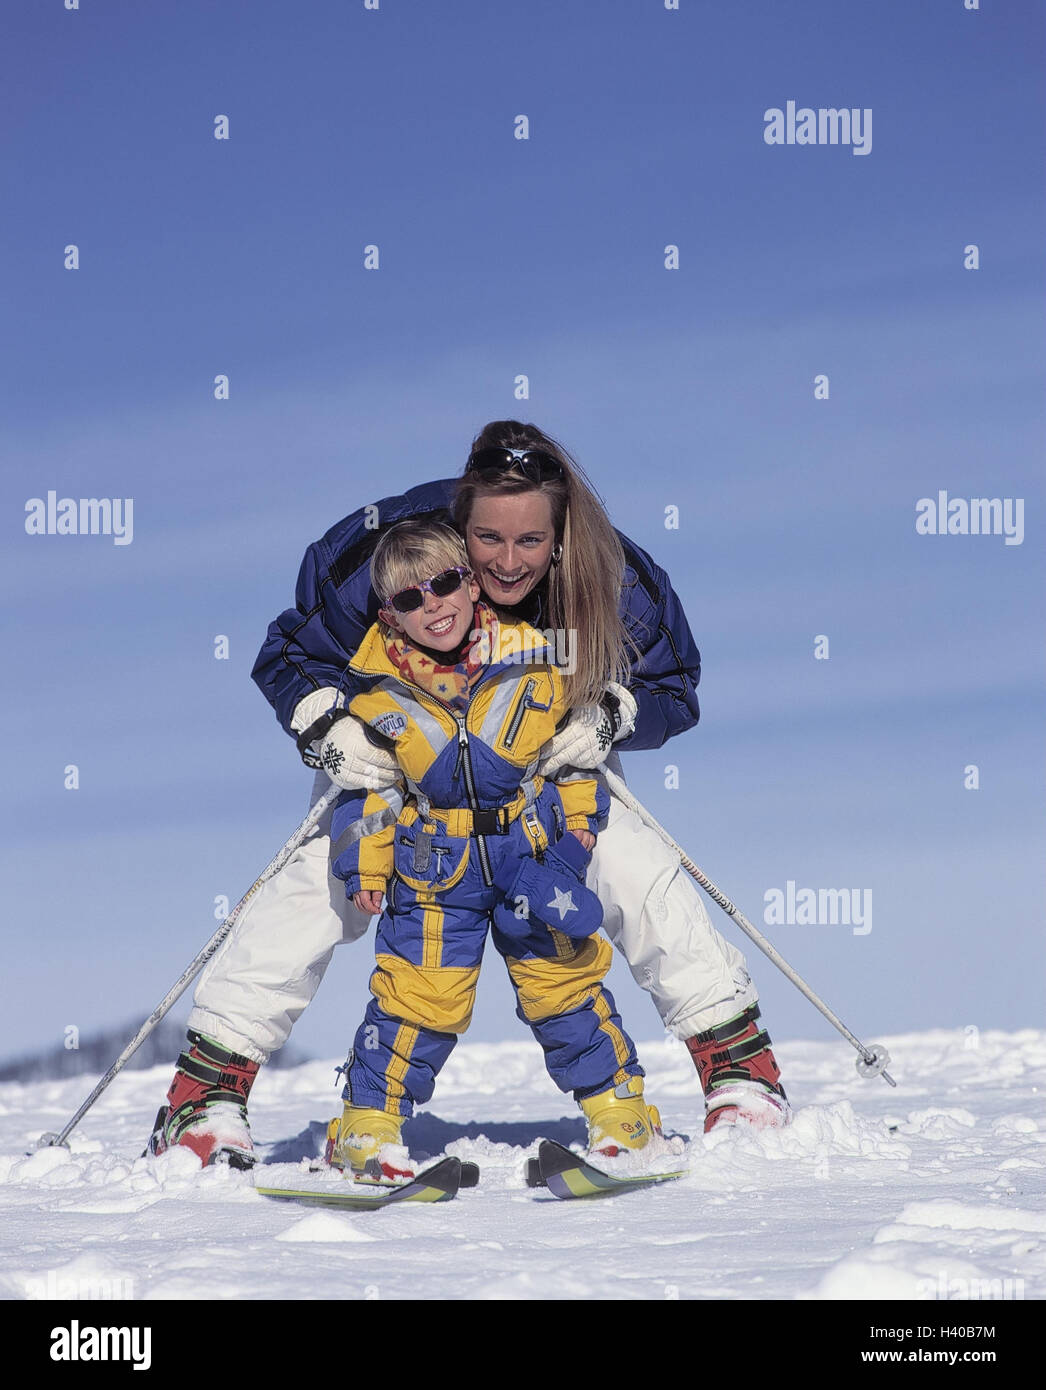 Ski runway, Mother, son, skiing snow, winter vacation, winter, winter sports, sport, sportily, ski, skier, runway, one after the other, learn, plough driving Stock Photo